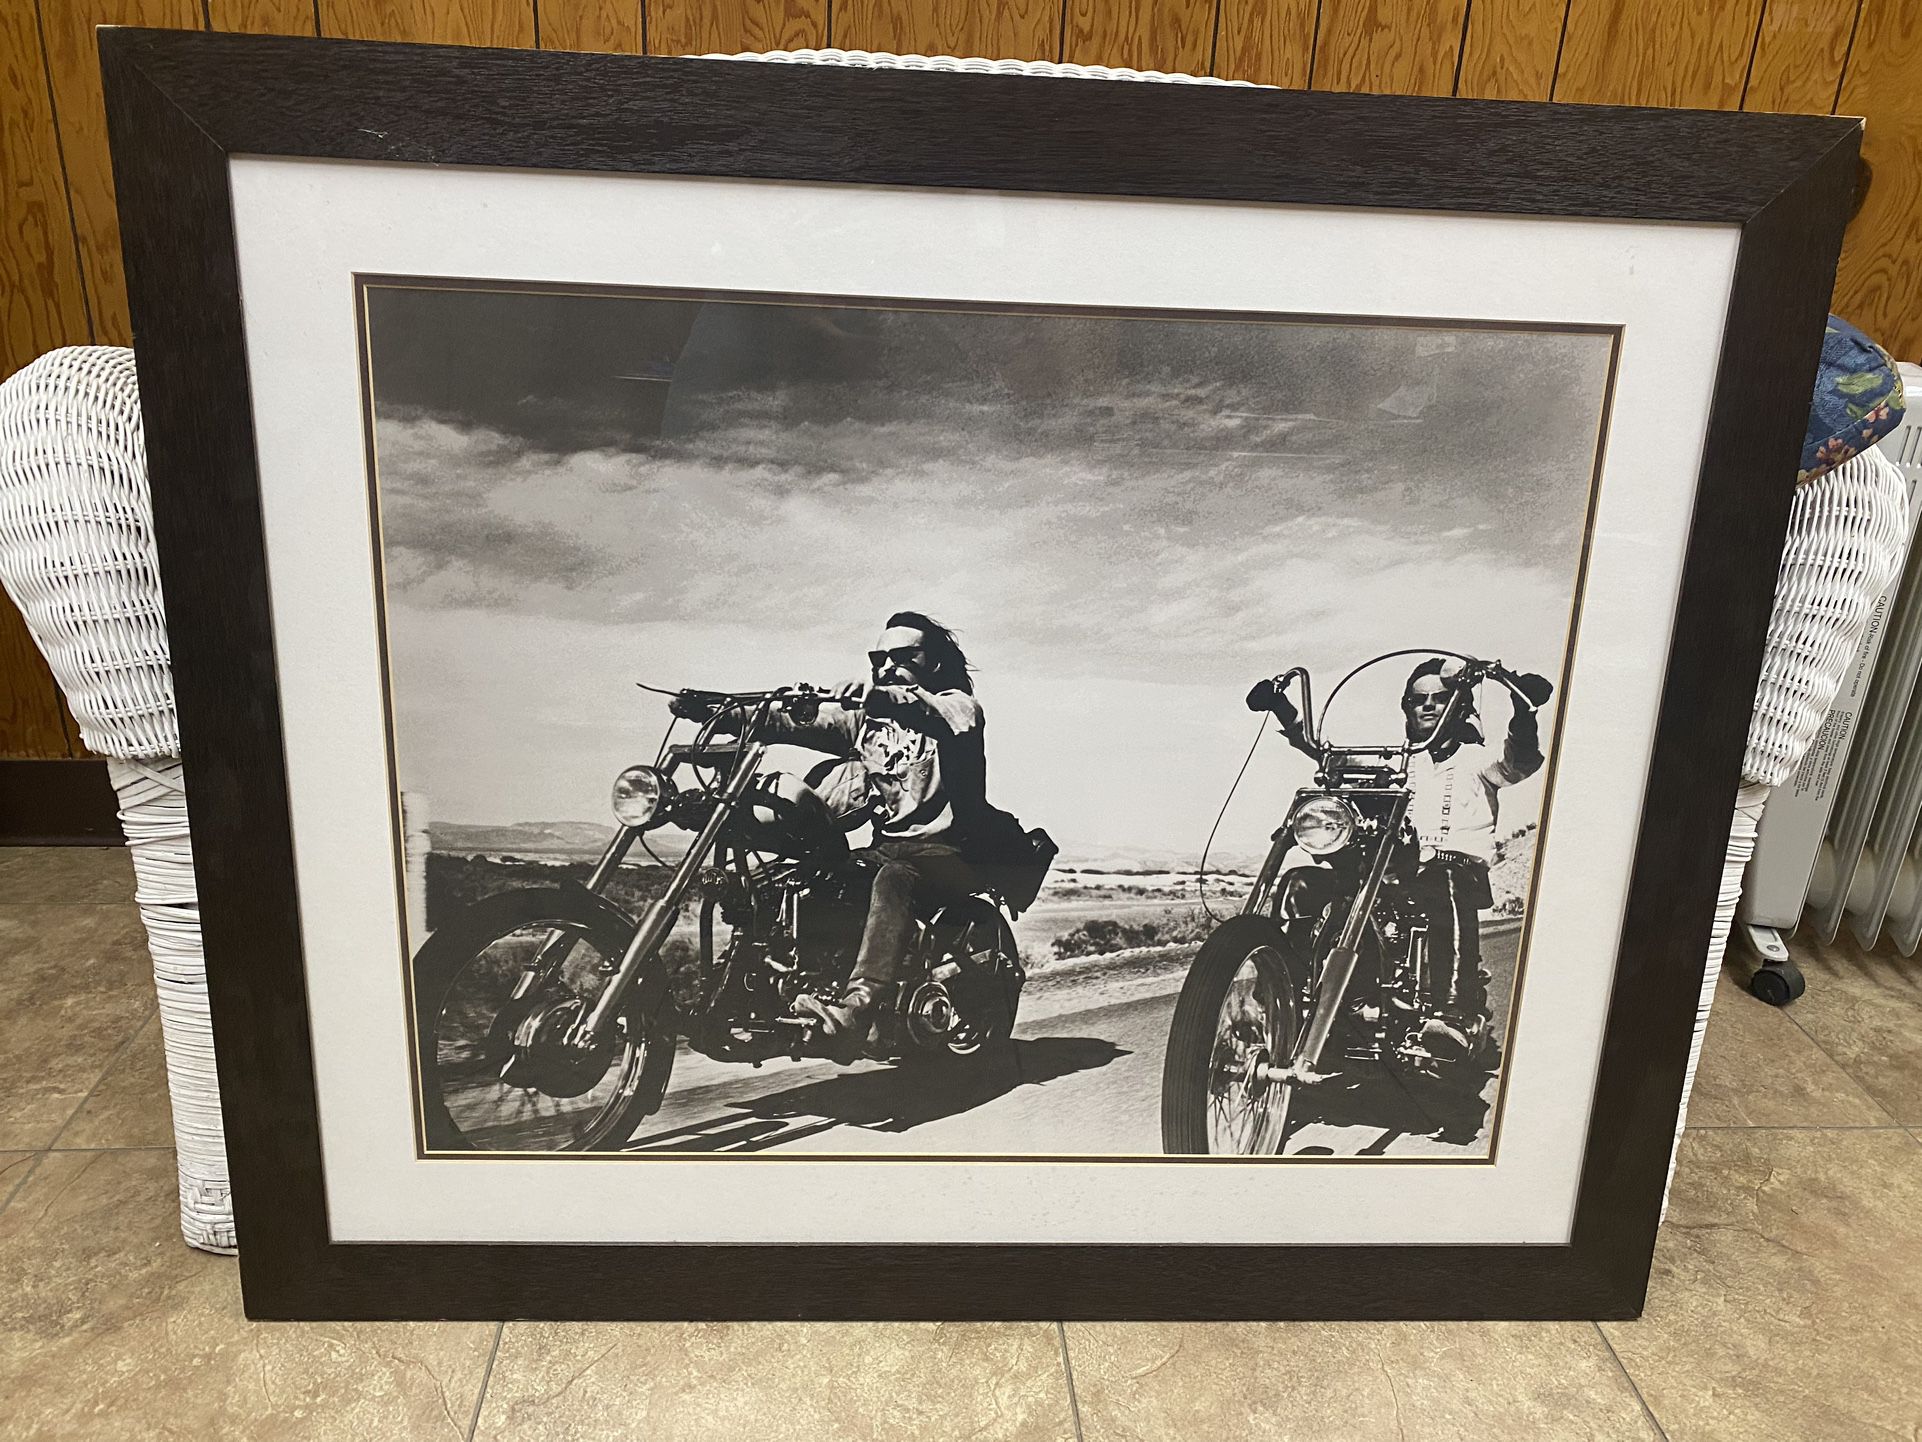 Easy Rider Framed Classic Iconic Biker Motorcycle Film B&W Photo Large 